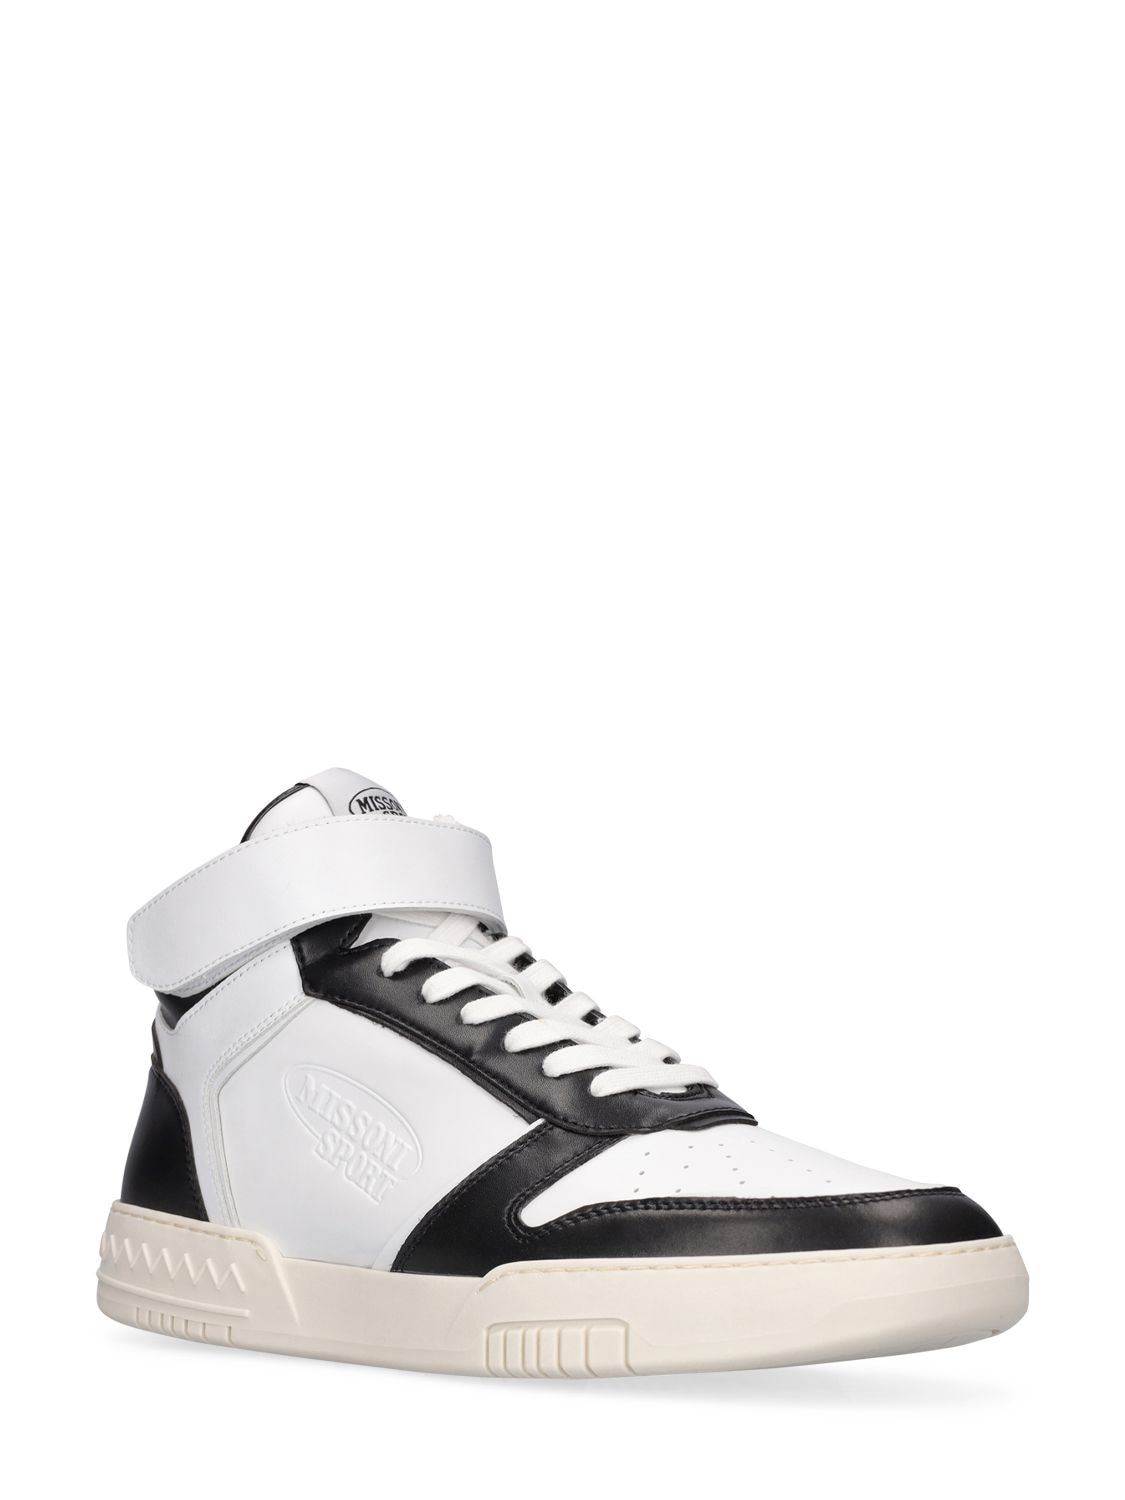 Shop Missoni Basket New High Sneakers In White,black